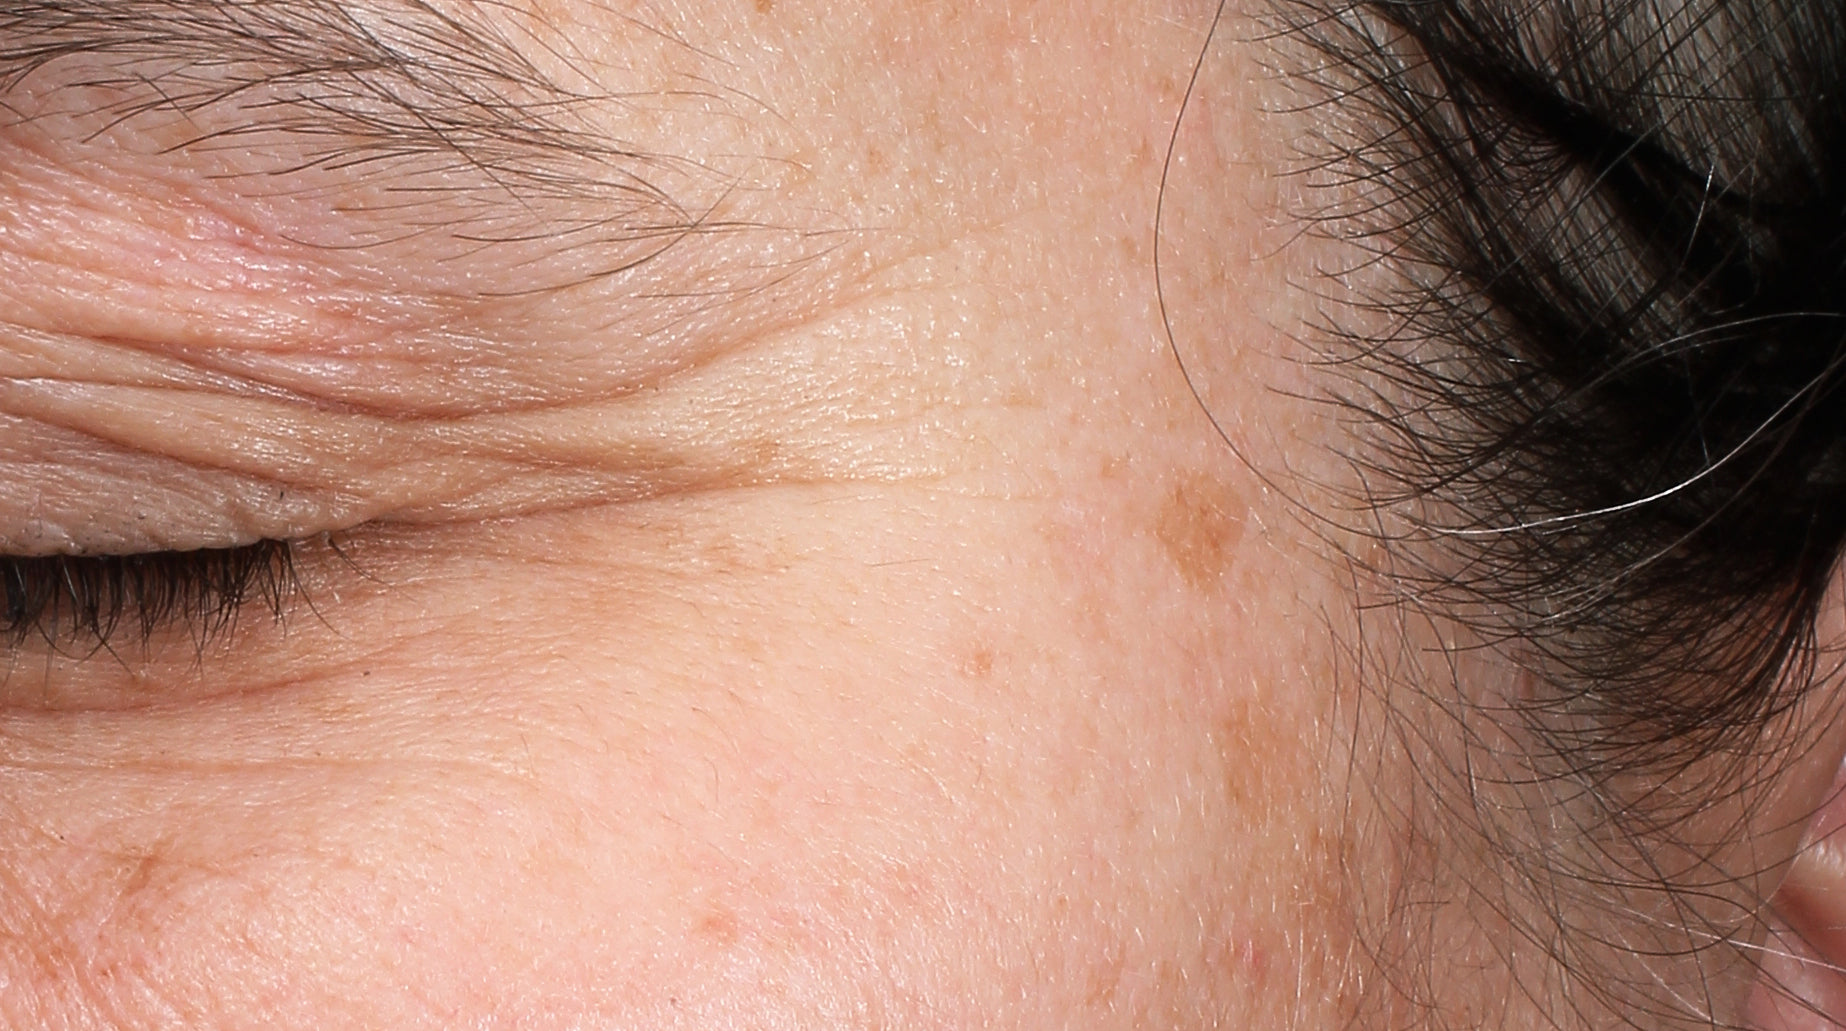 Before using CELF Rejuvenation Station - CELF is proven to dramatically reduce wrinkles